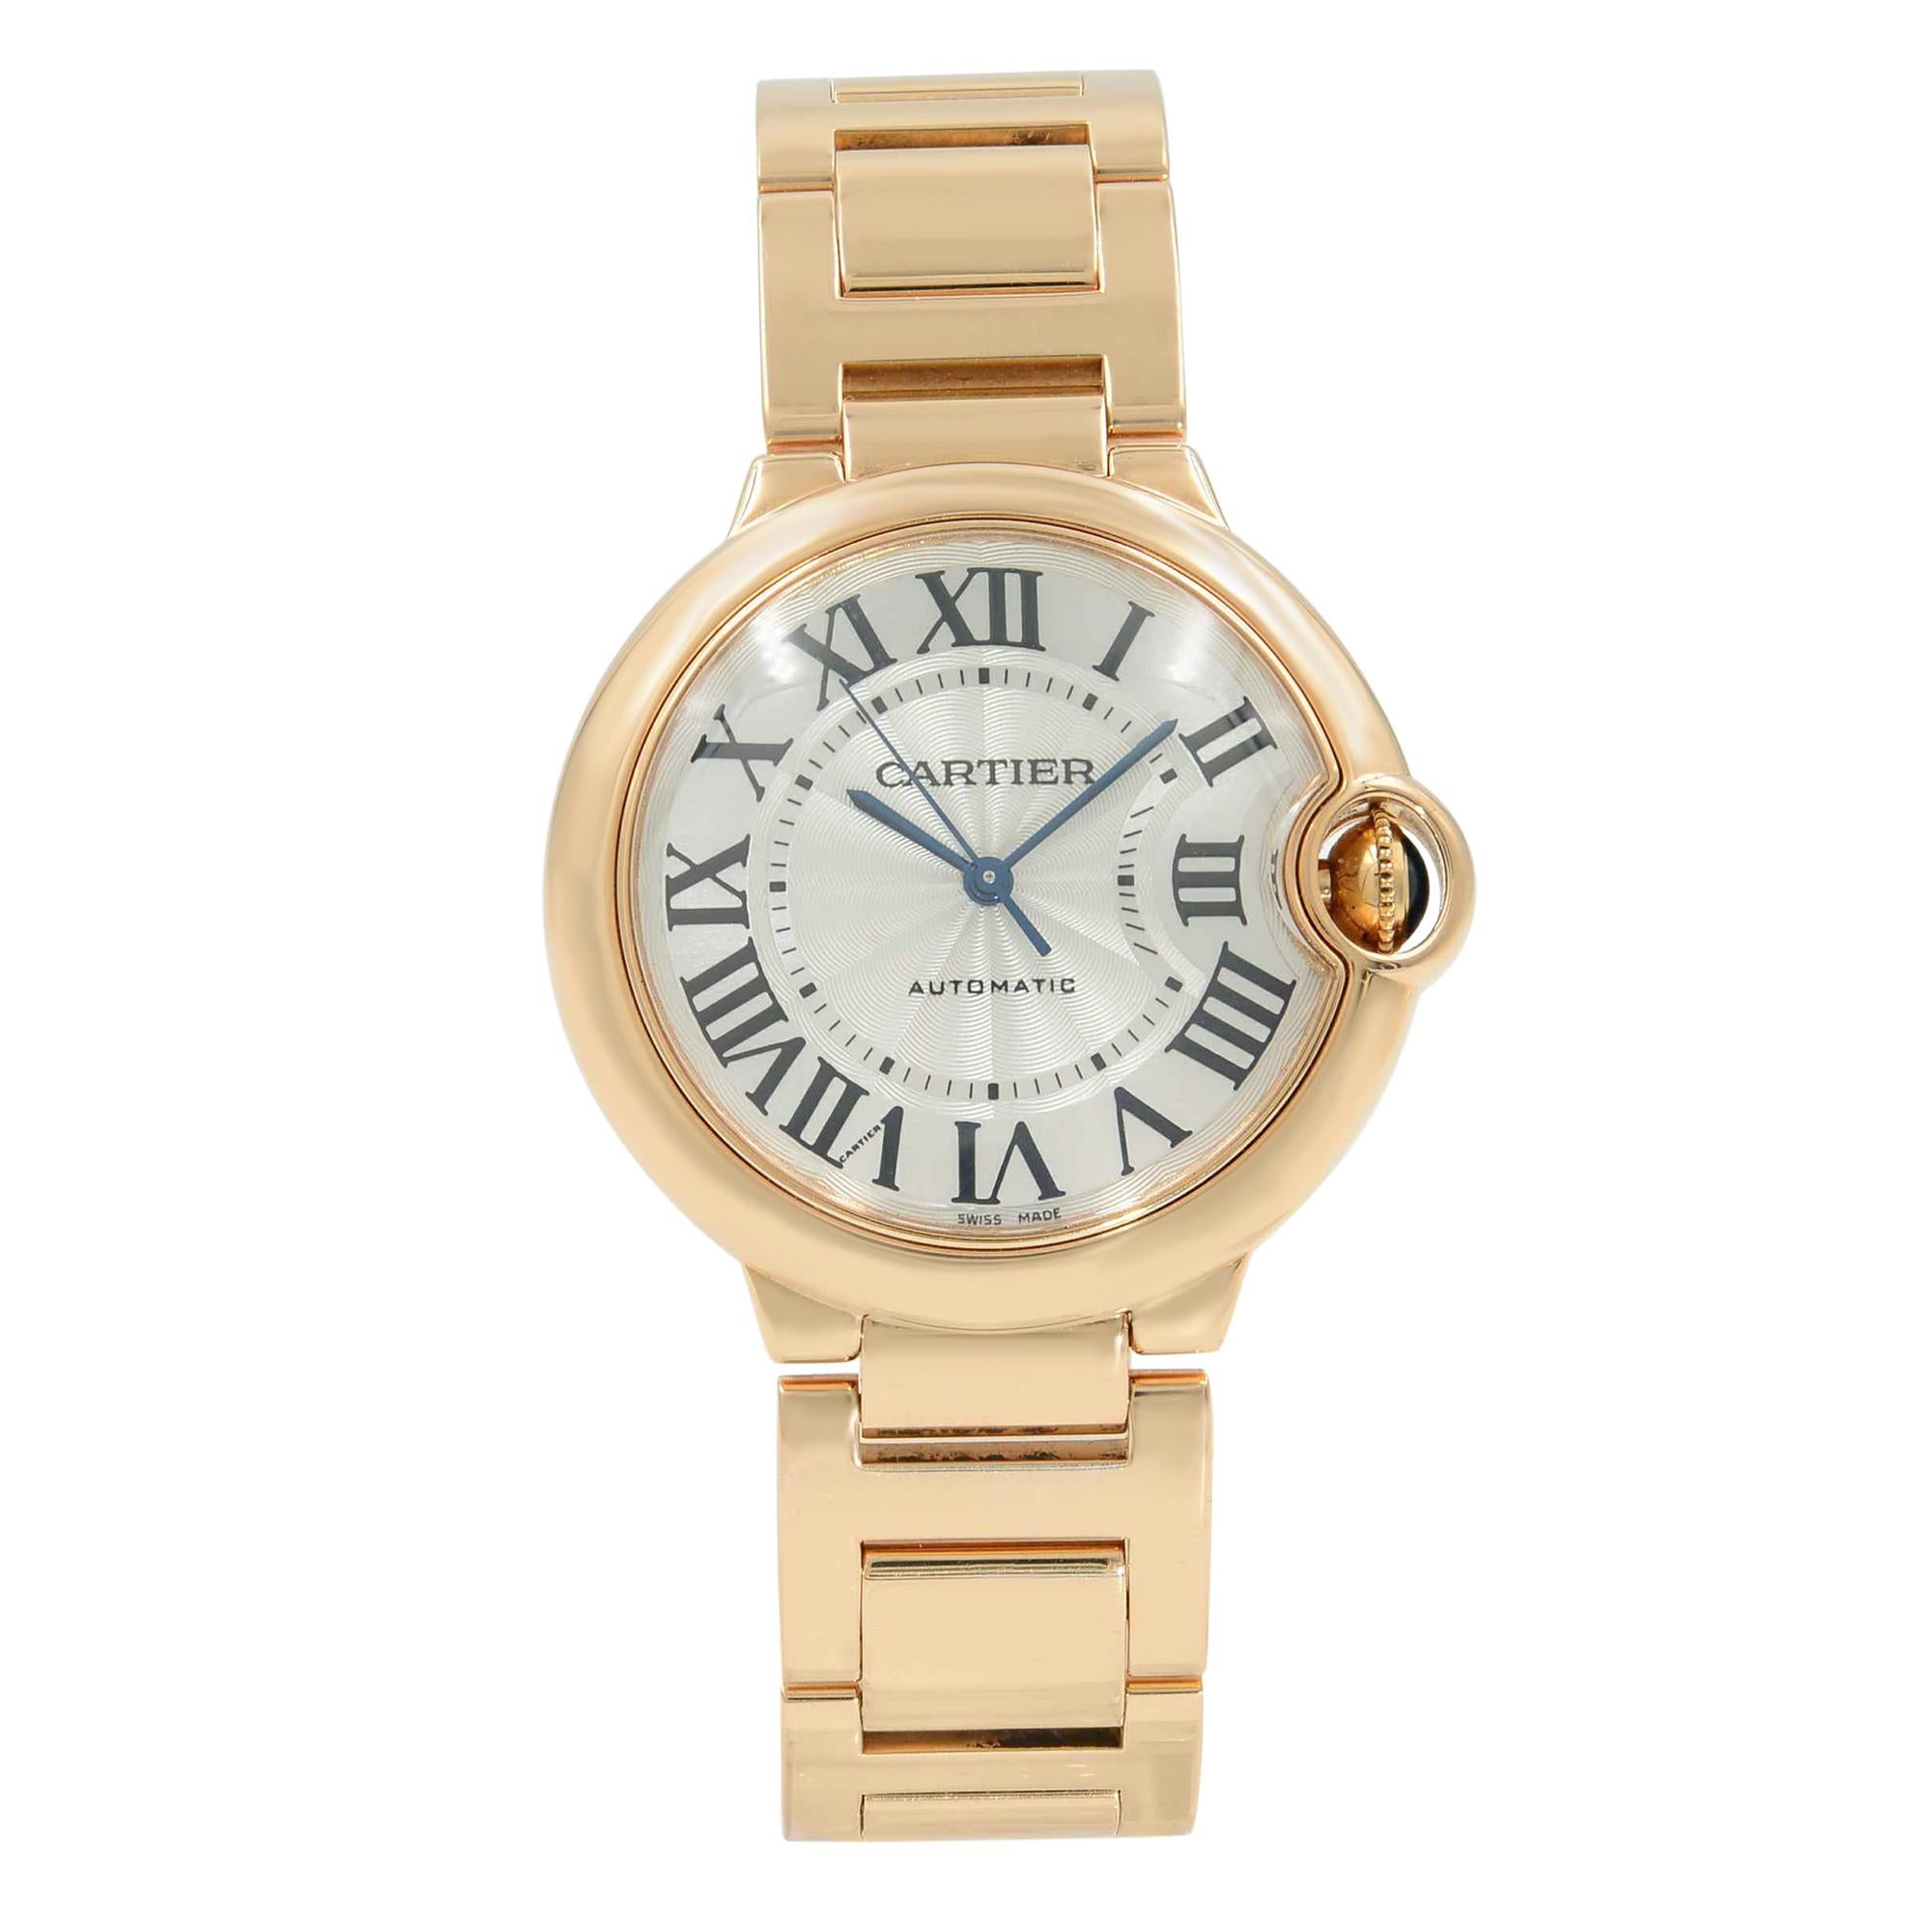 This pre-owned Cartier Ballon Bleu W69004Z2 is a beautiful Unisex timepiece that is powered by an automatic movement which is cased in a rose gold case. It has a round shape face, no features dial, and has hand roman numerals style markers. It is